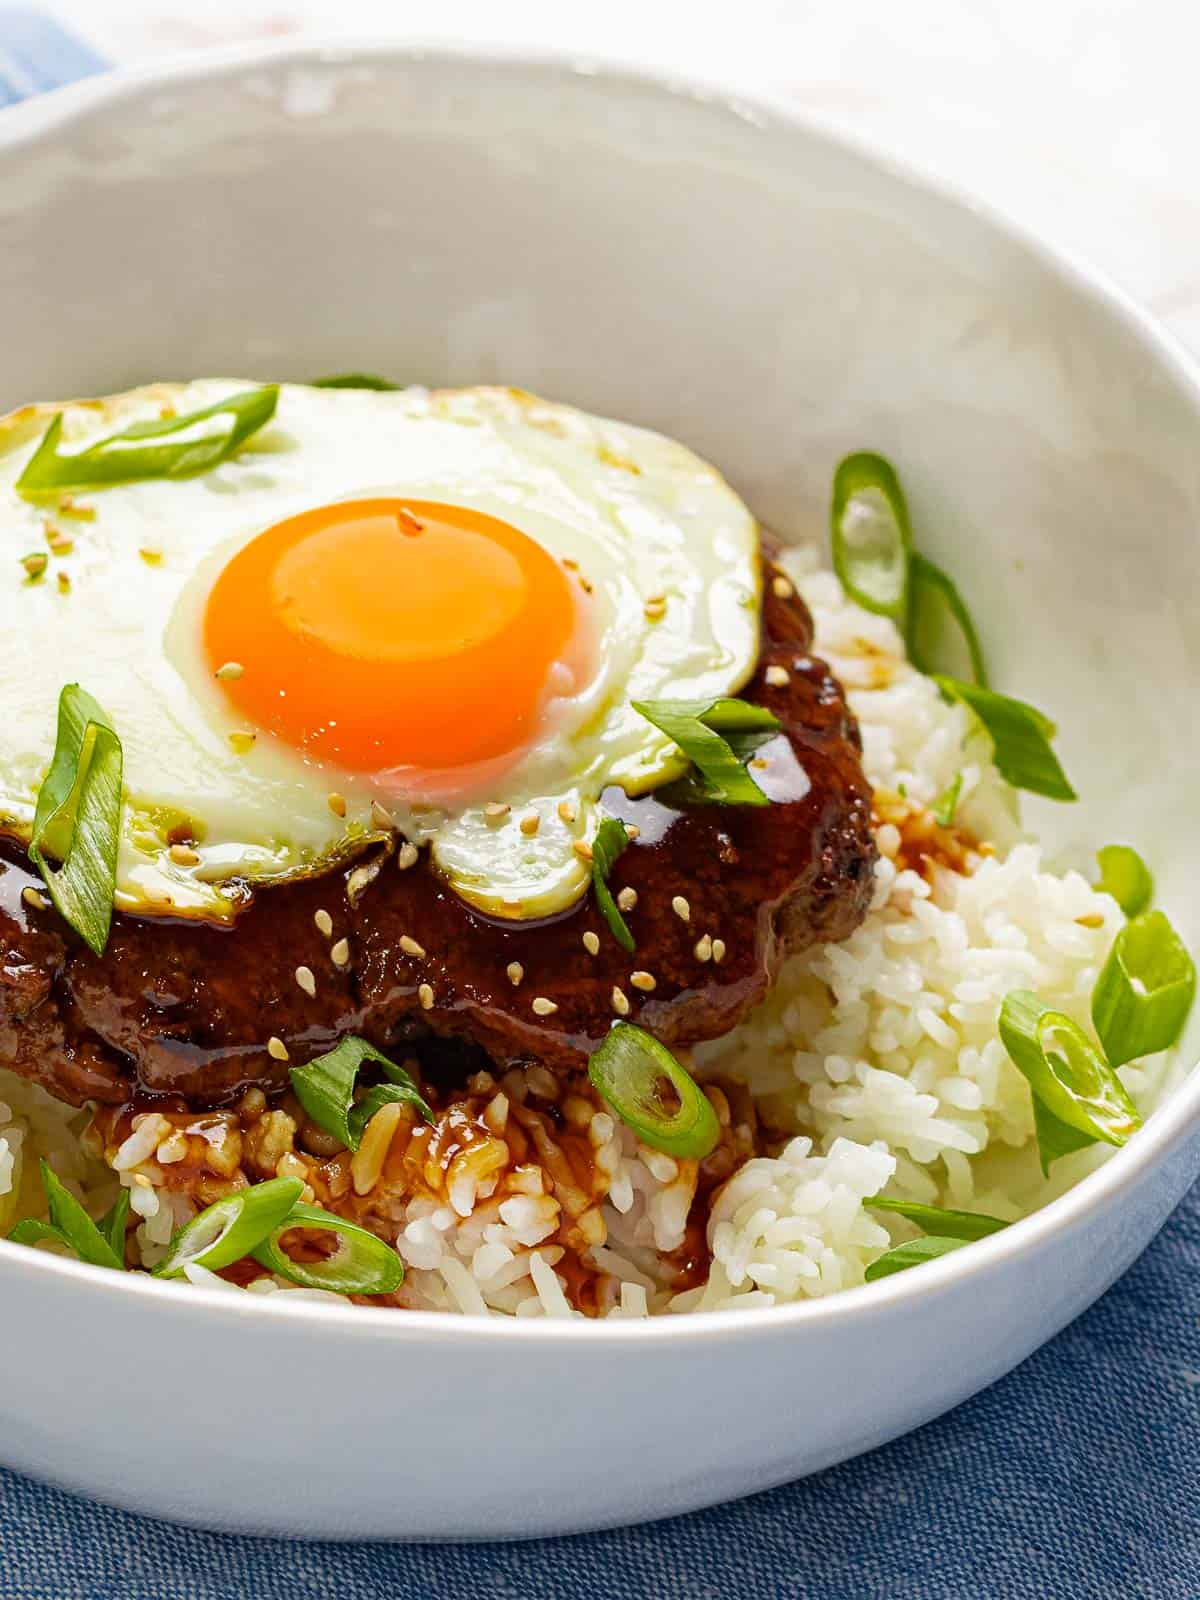 Loco moco in a white bowl filled with white rice, beef burger, brown gravy, and a fried egg that is garnished with green onions.